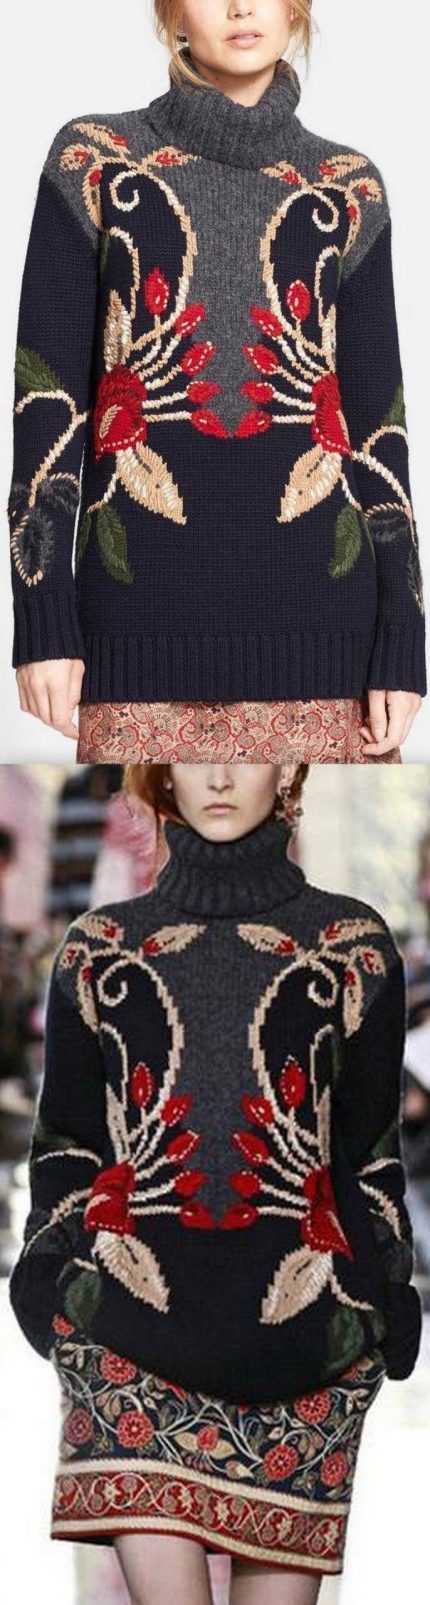 'Rianna' Embroidered Oversize Turtleneck Sweater